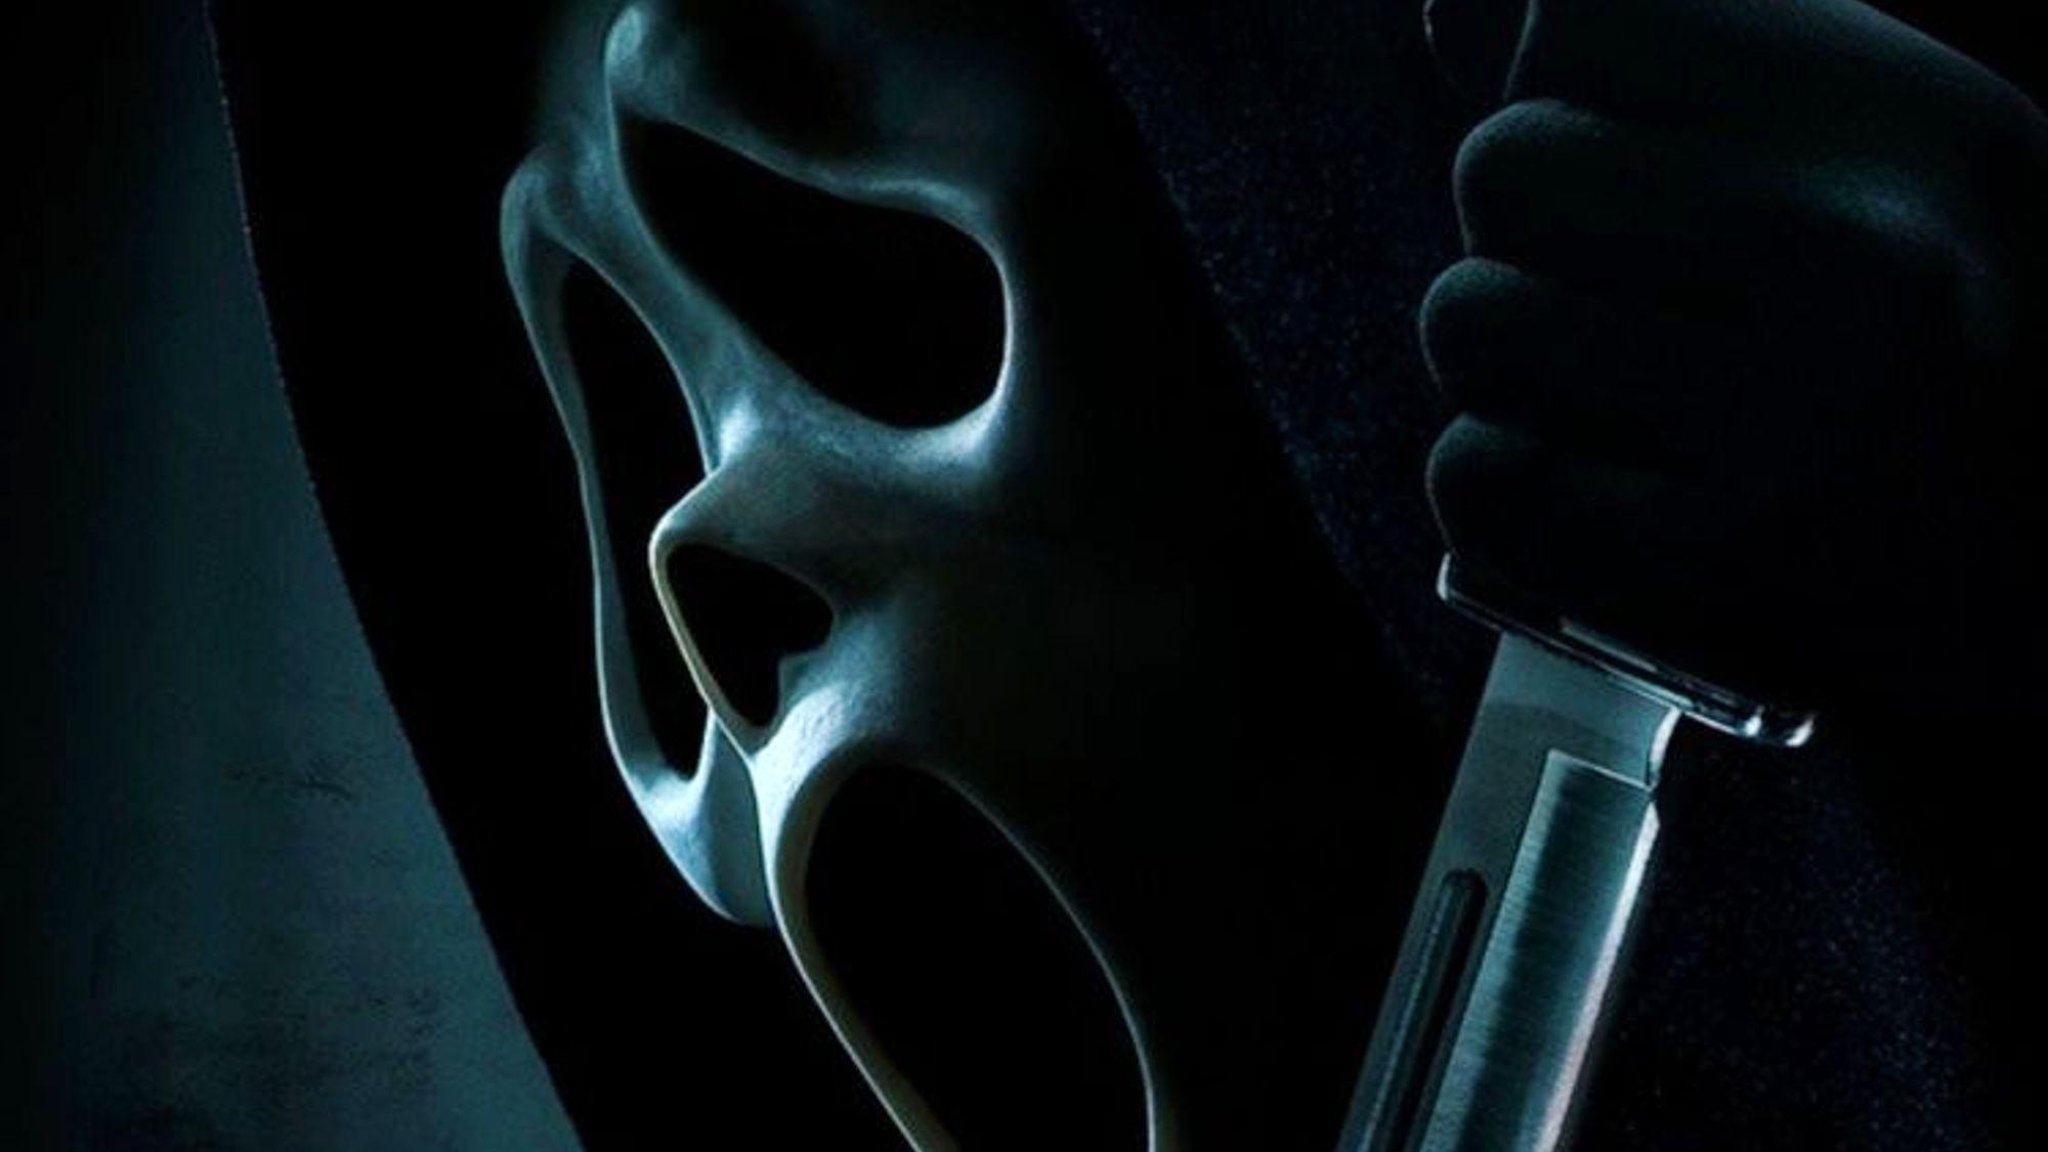 Scream 5: Everything we know about the new Scream movie, including Scream 5 cast, trailer and release date UK